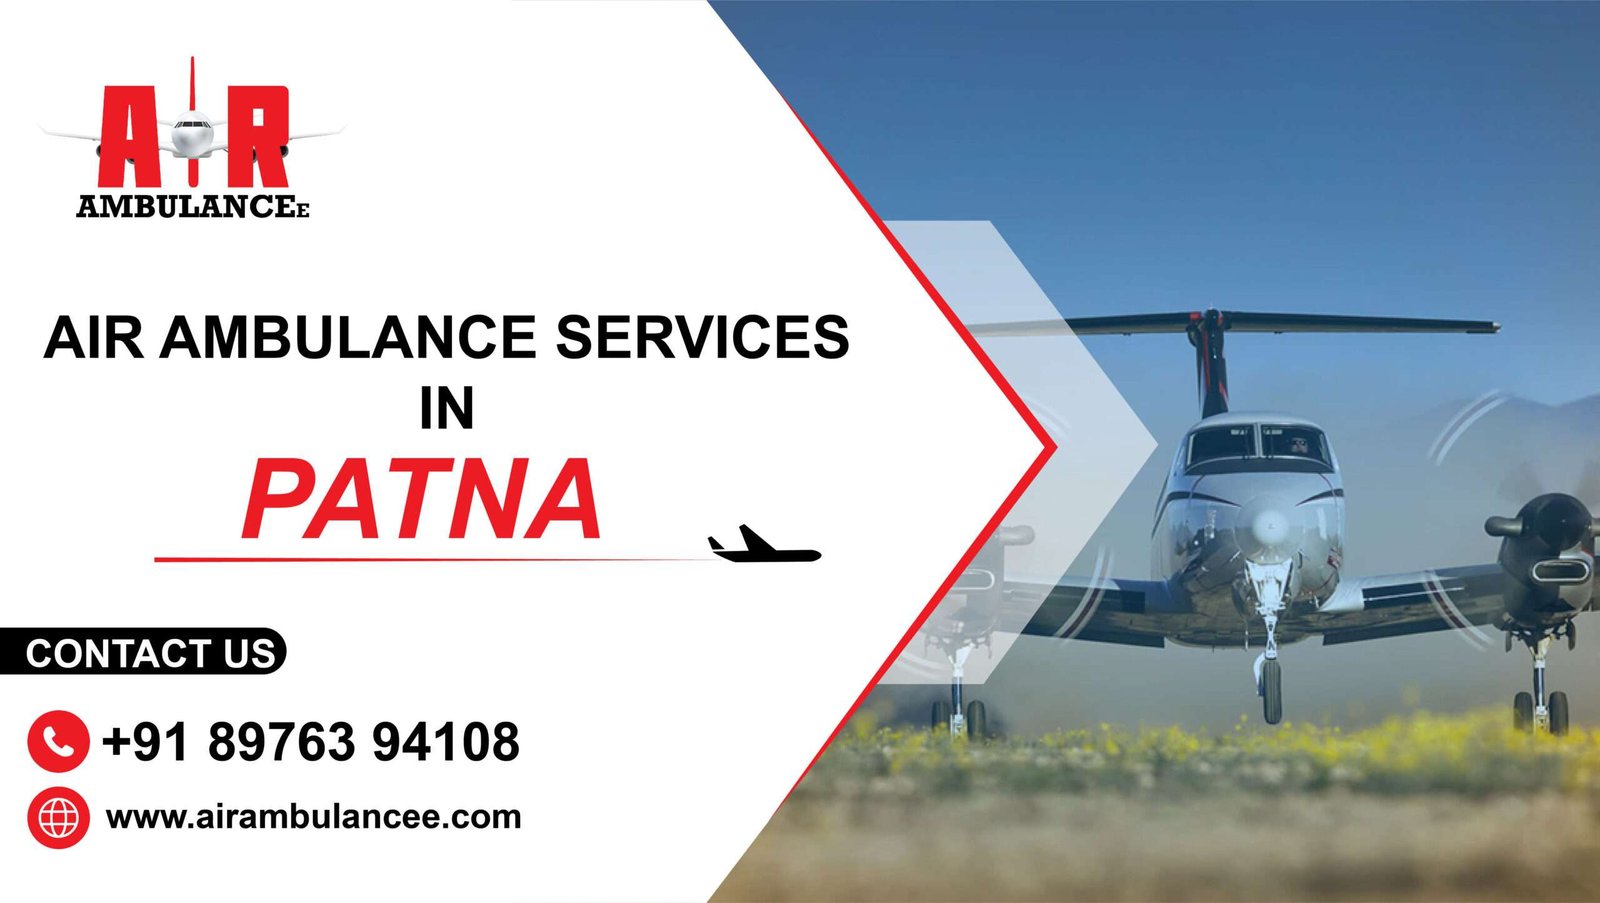 Air Ambulance Services In Patna